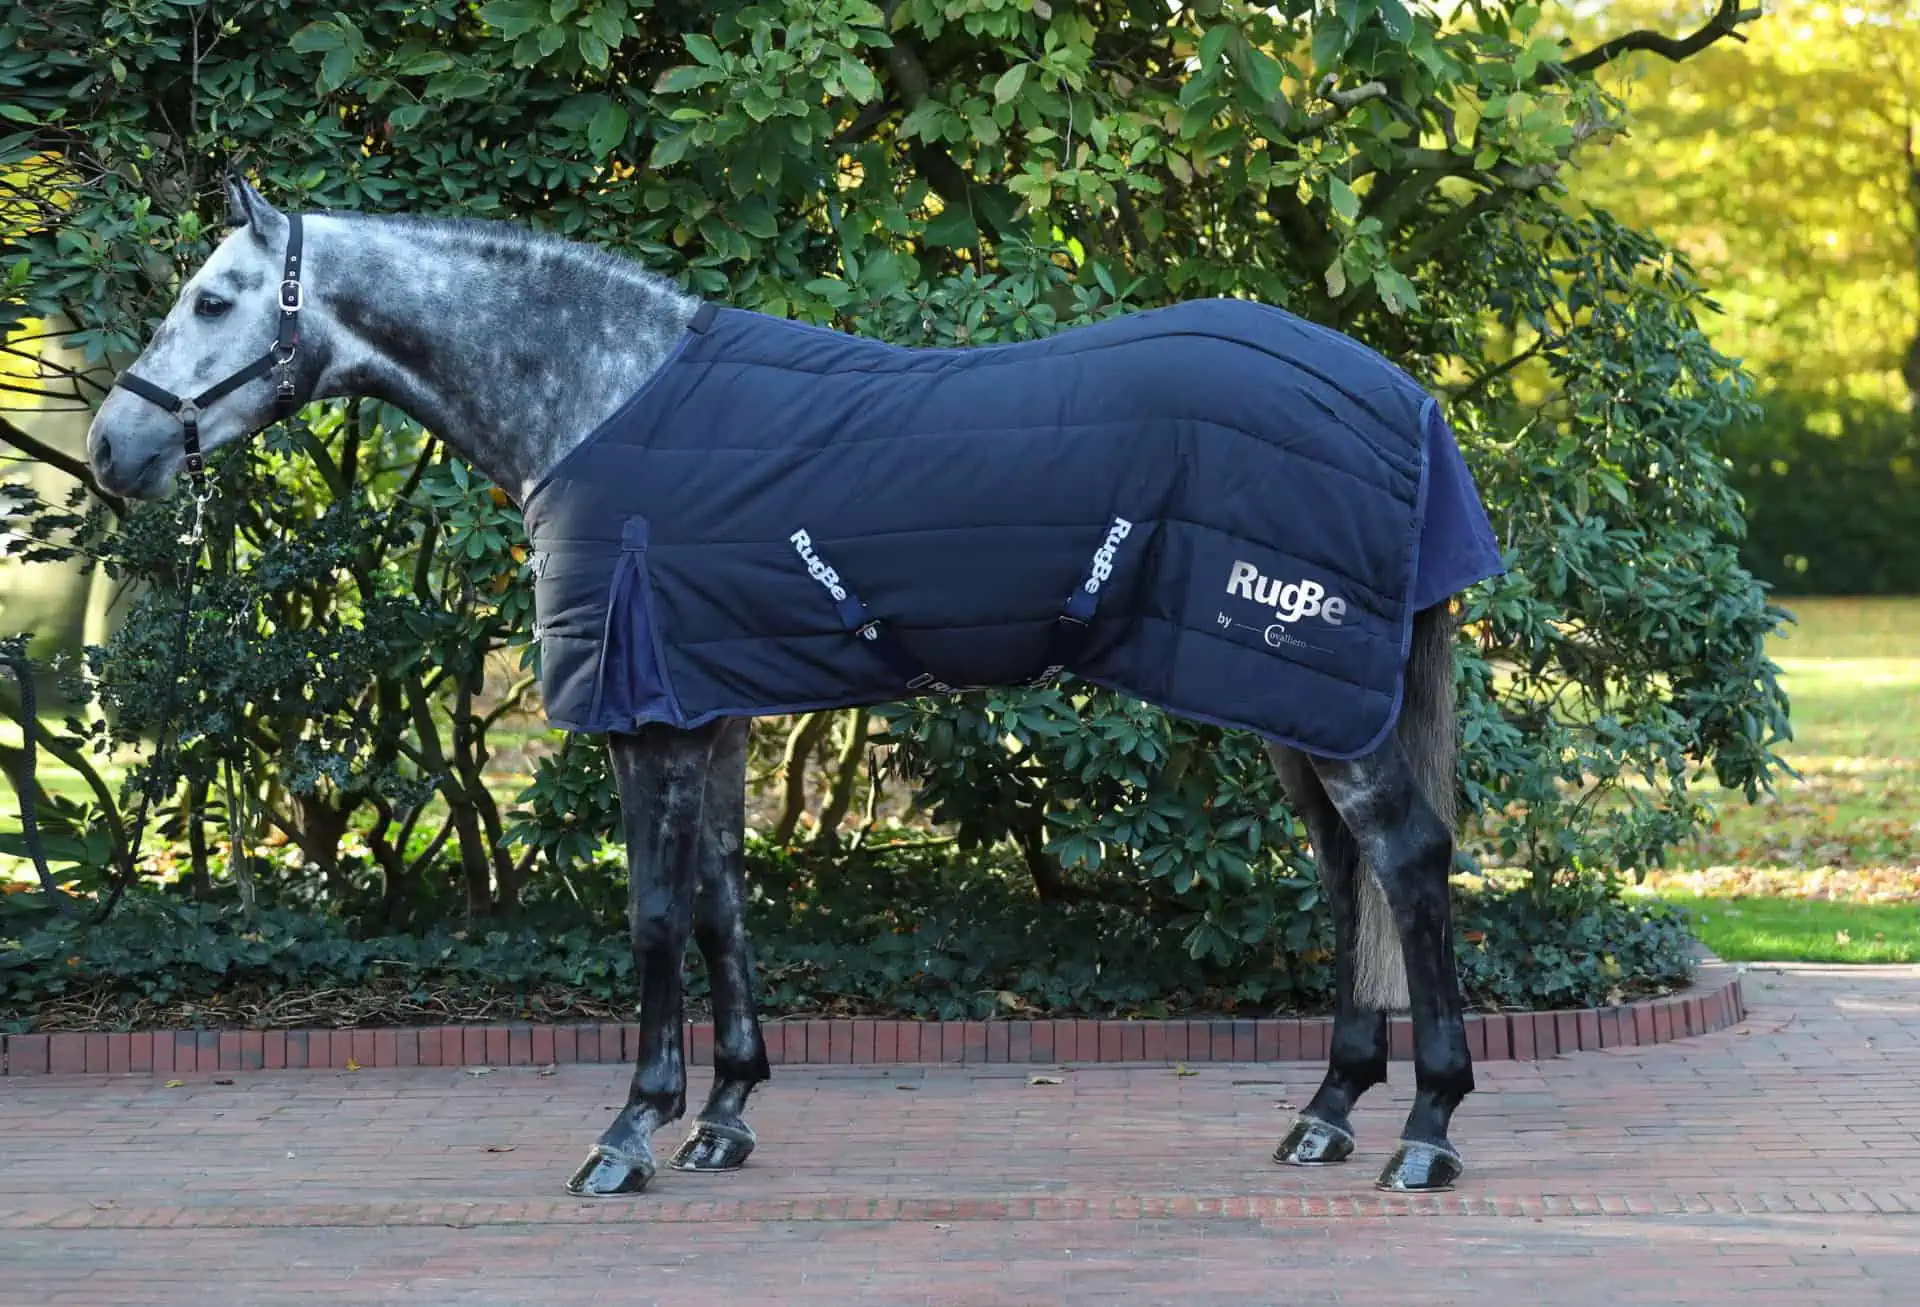 Stable Horse Blkt RugBe Indoor 115 cm, blue